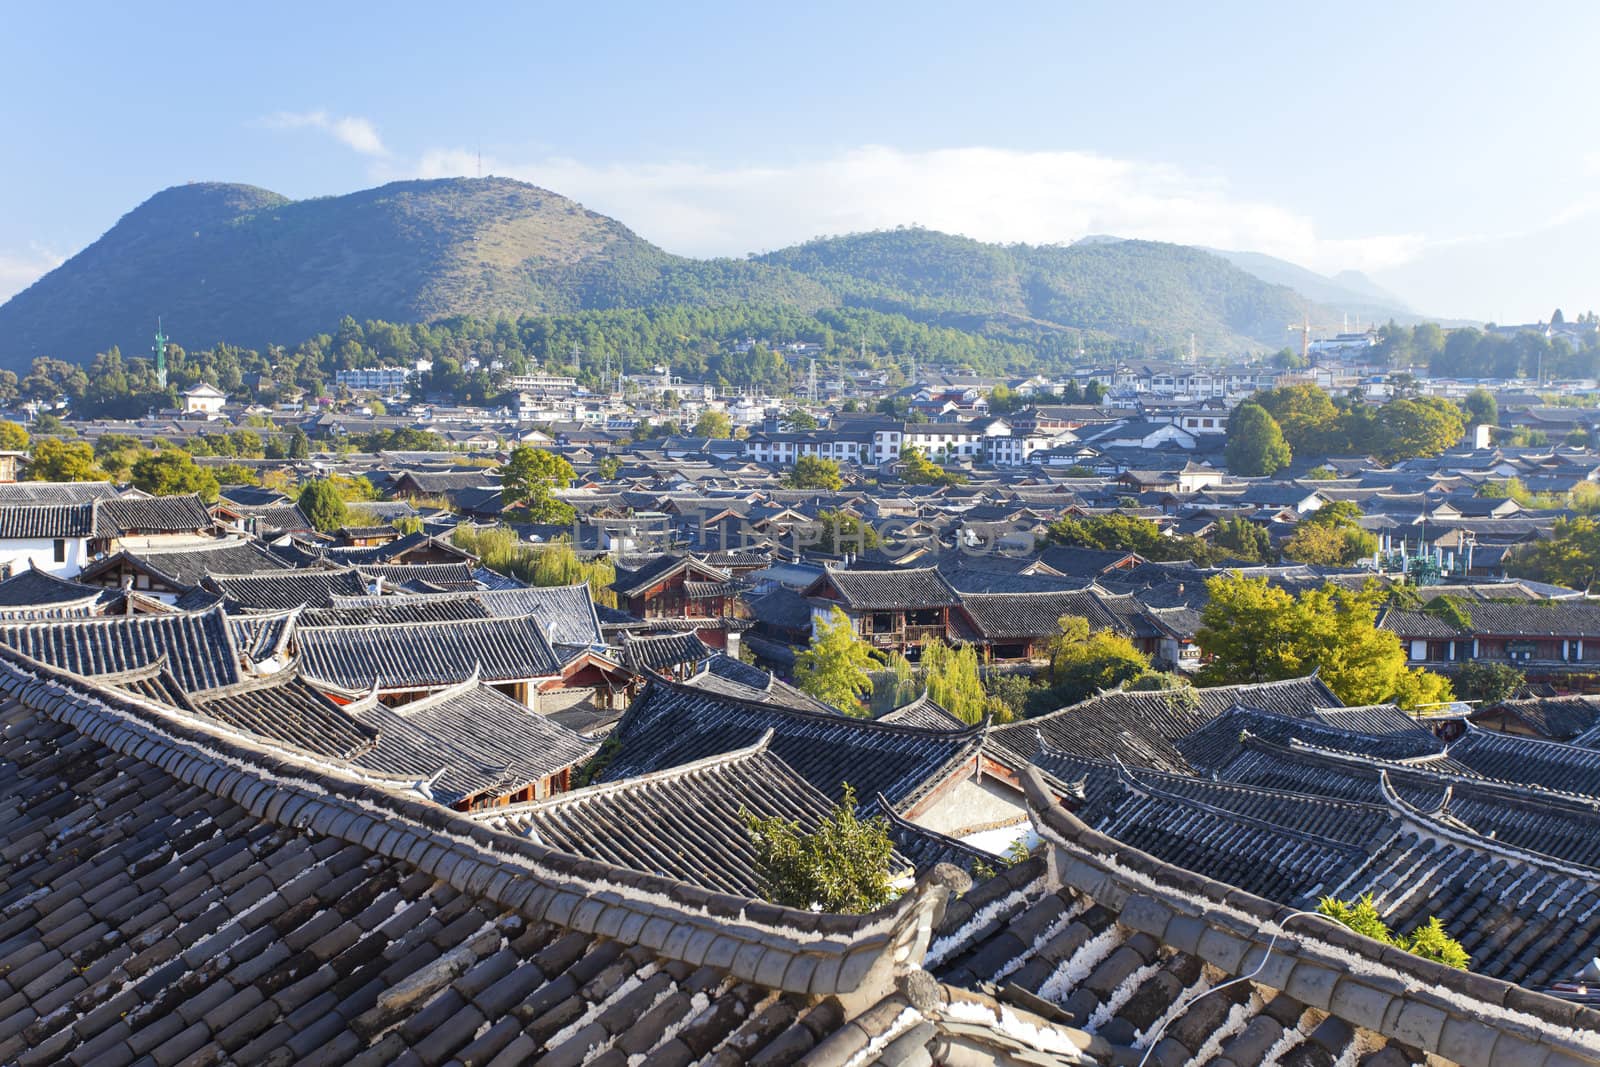 Lijiang old town in the morning, the UNESCO world heritage in Yunnan province, China. 